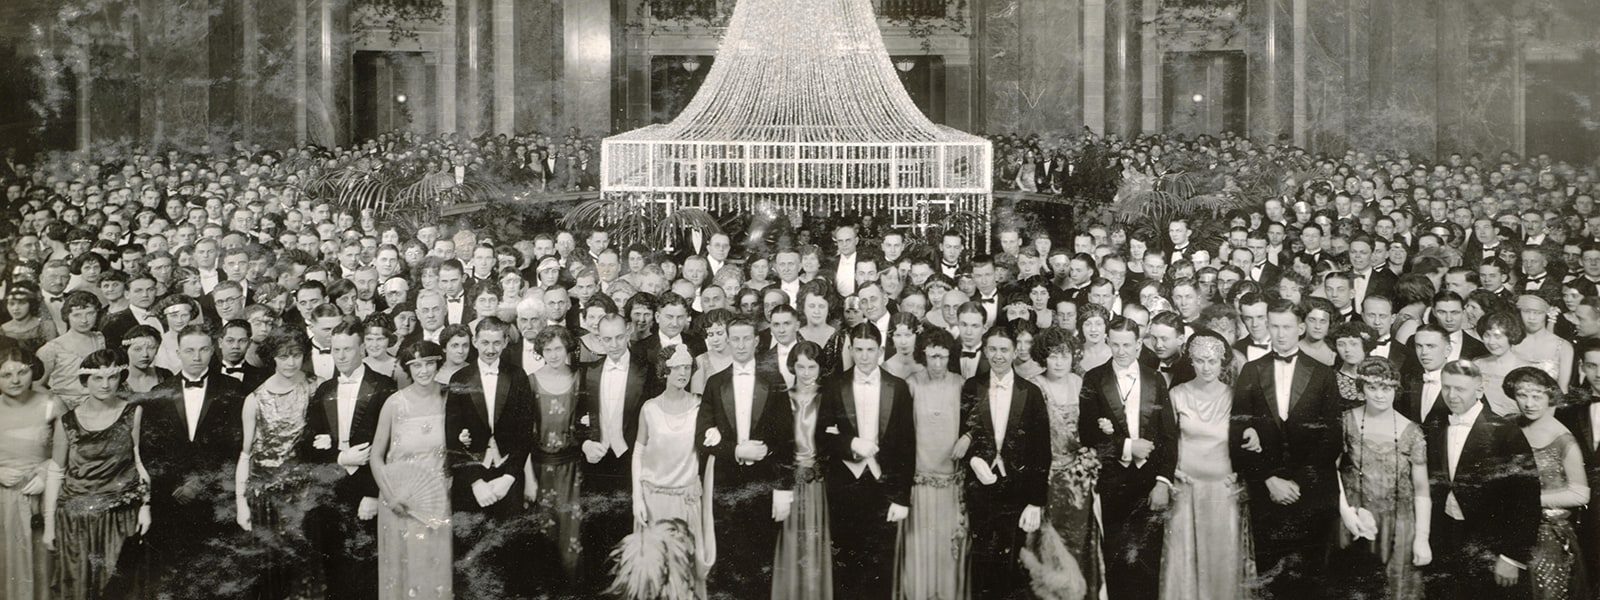 Several hundred students gathered around the rotunda at the Wisconsin State Capitol during the 1924 junior prom. They are dressed in formal attire beneath a crystal chandelier.